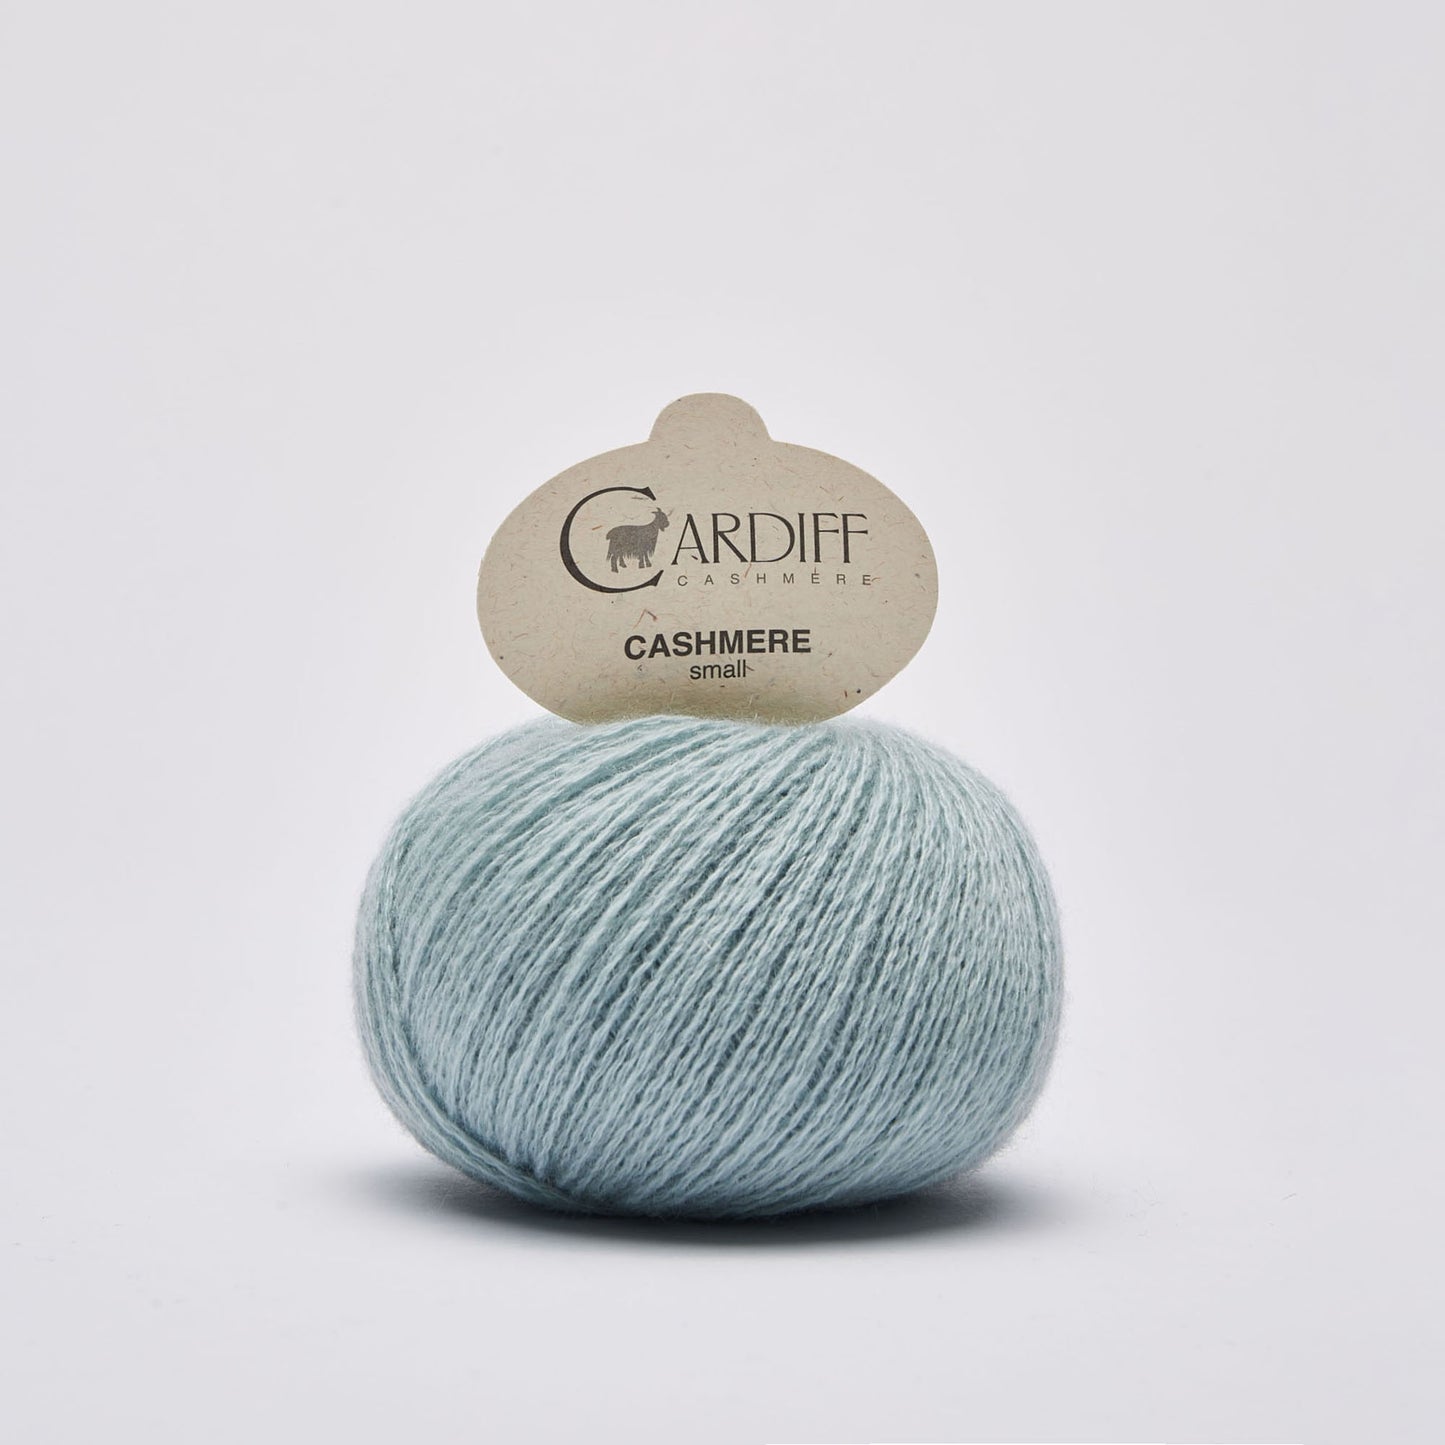 Cardiff SMALL gentle yarn, 677, MOSE, comp: 100% Cashmere